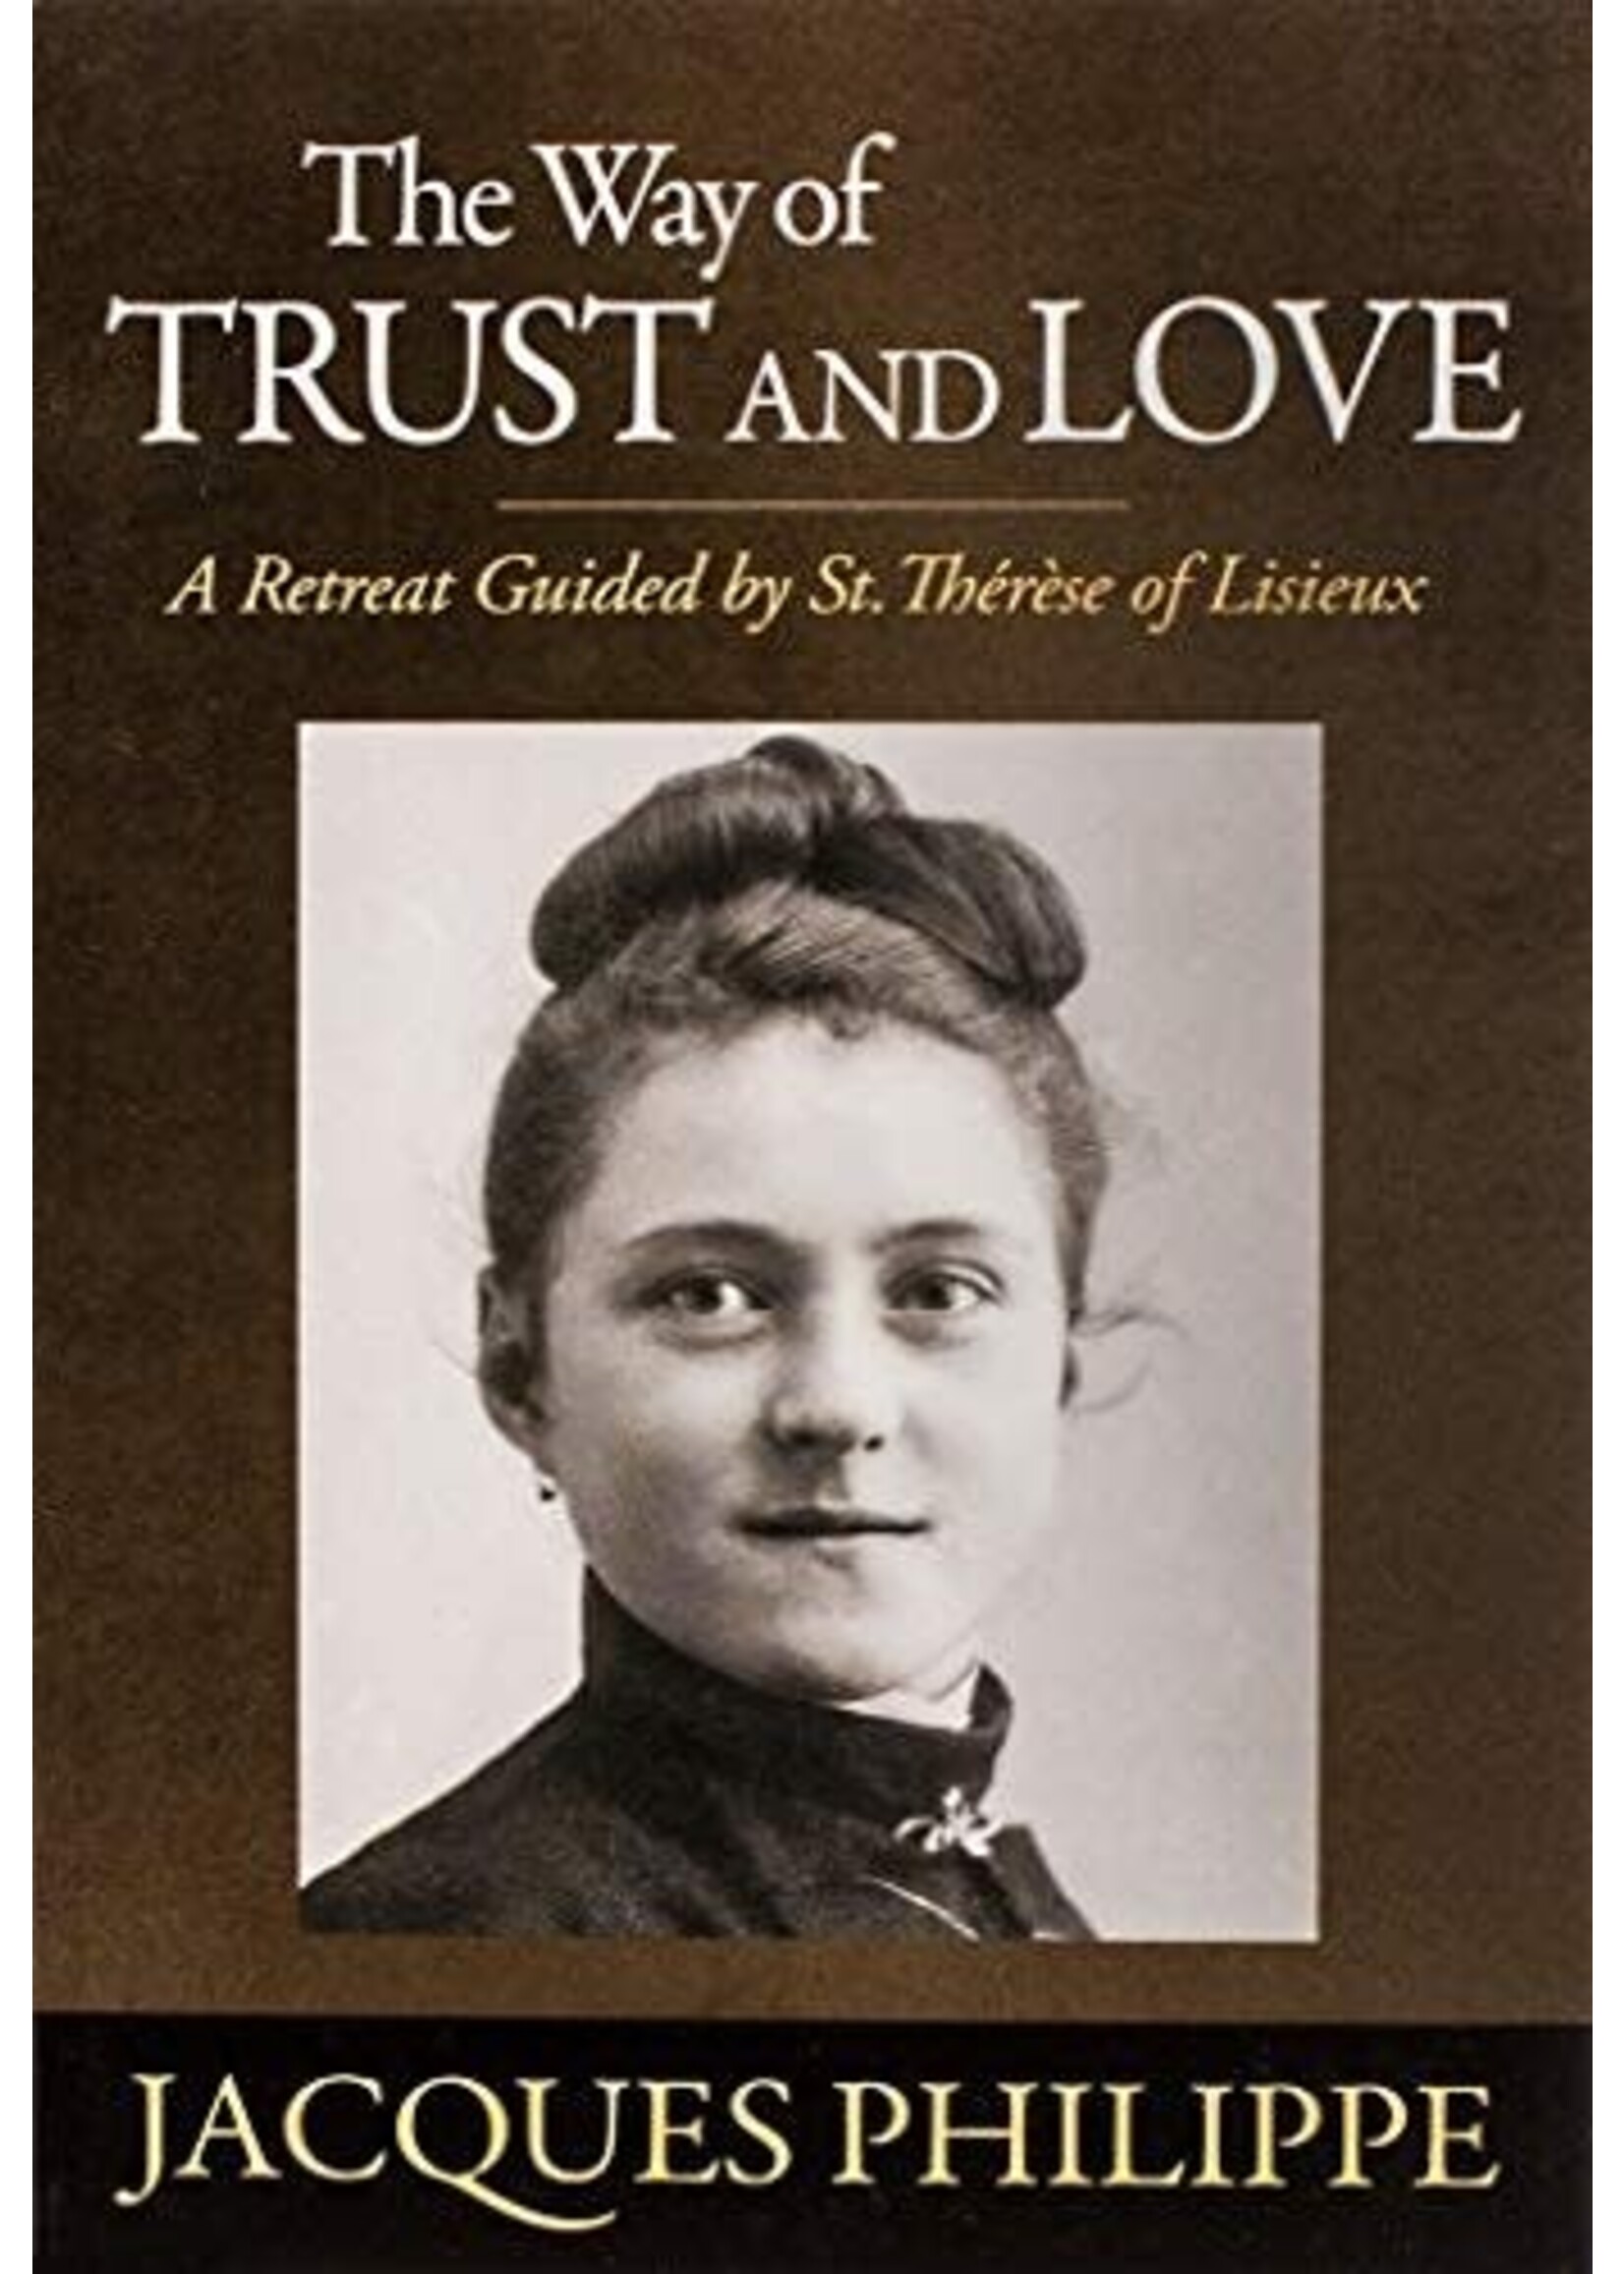 The Way of Trust and Love: A Retreat Guided by St Thérèse of Lisieux